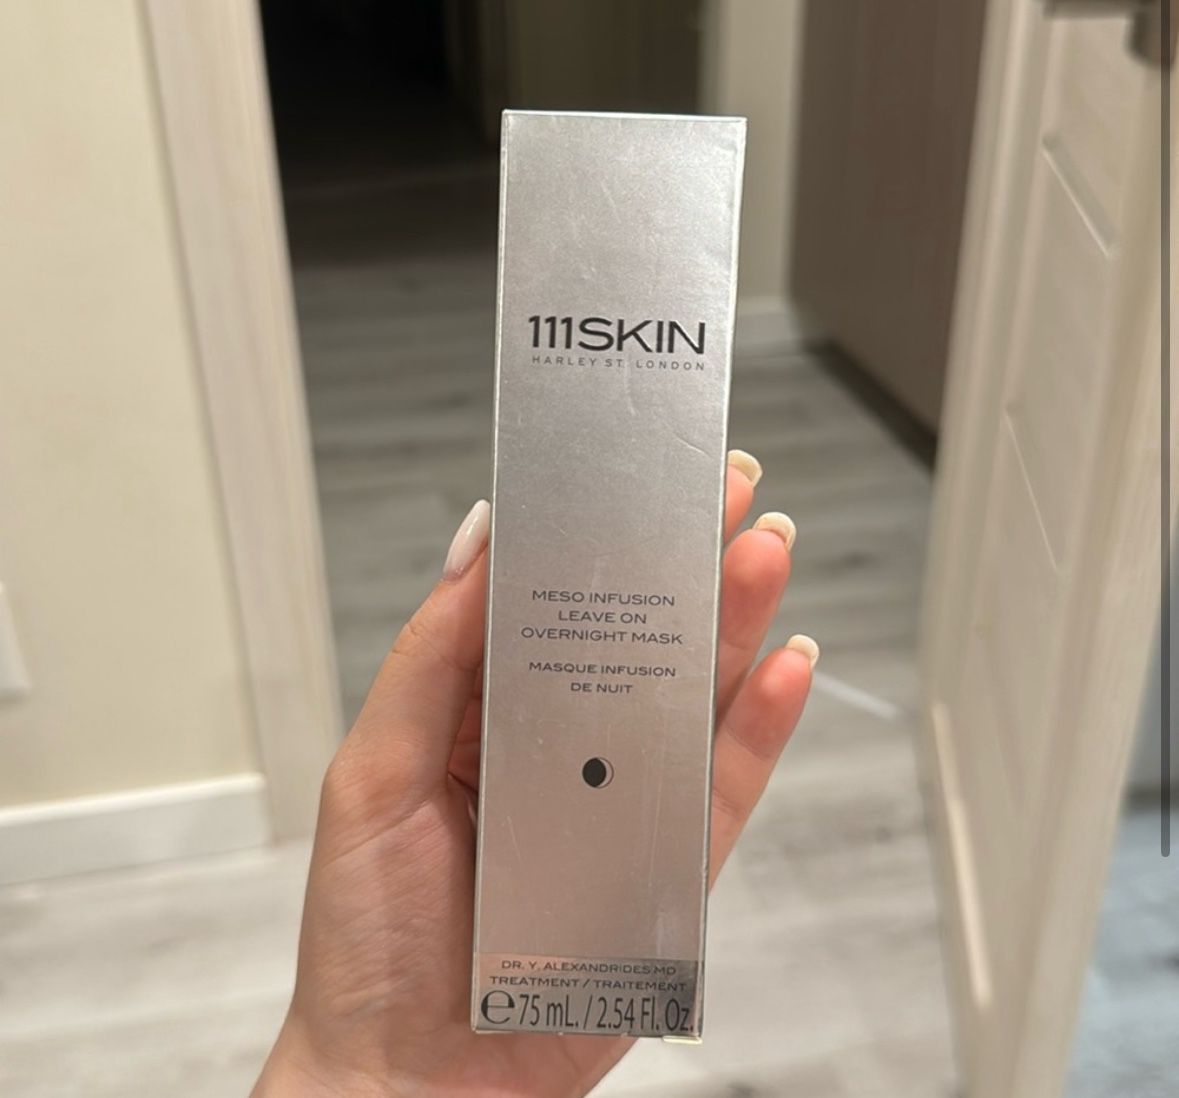 111Skin Meso Infusion Leave on overnight Mask